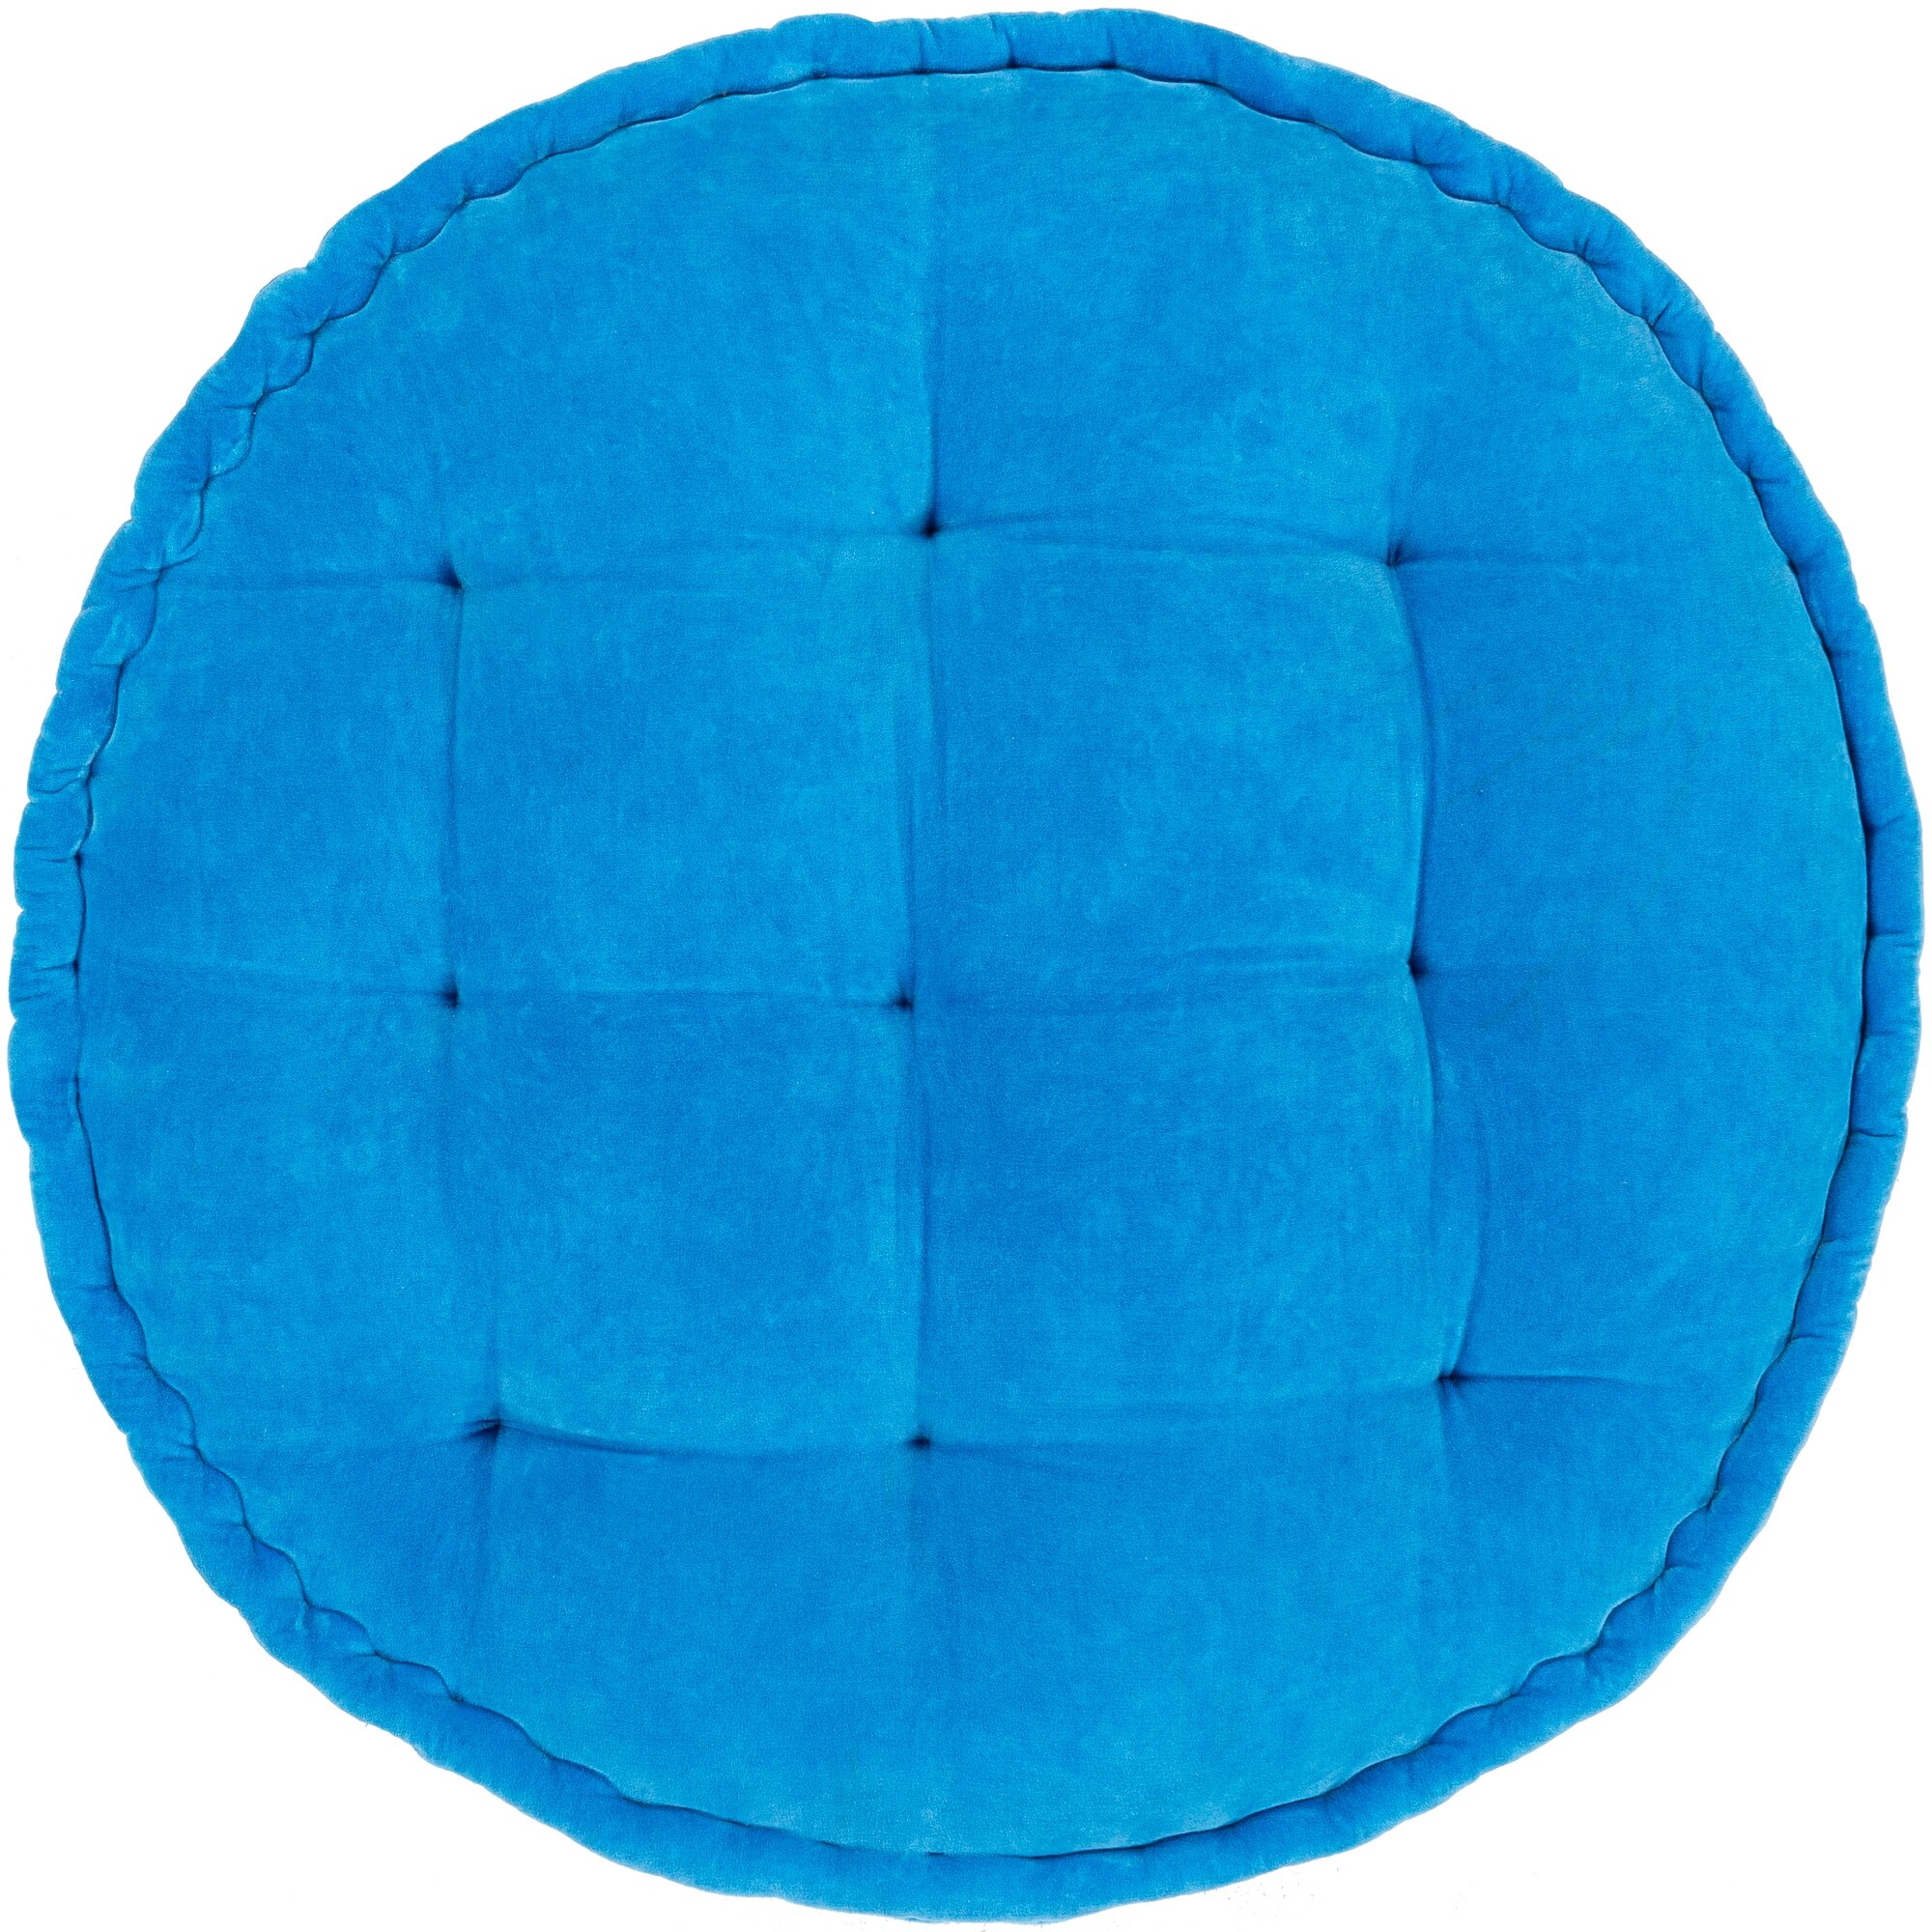 https://ak1.ostkcdn.com/images/products/is/images/direct/6eff17d91df3572cd88a55b59928d91d12c79526/The-Curated-Nomad-Atlanta-30-inch-Tufted-Velvet-Floor-Pillow.jpg